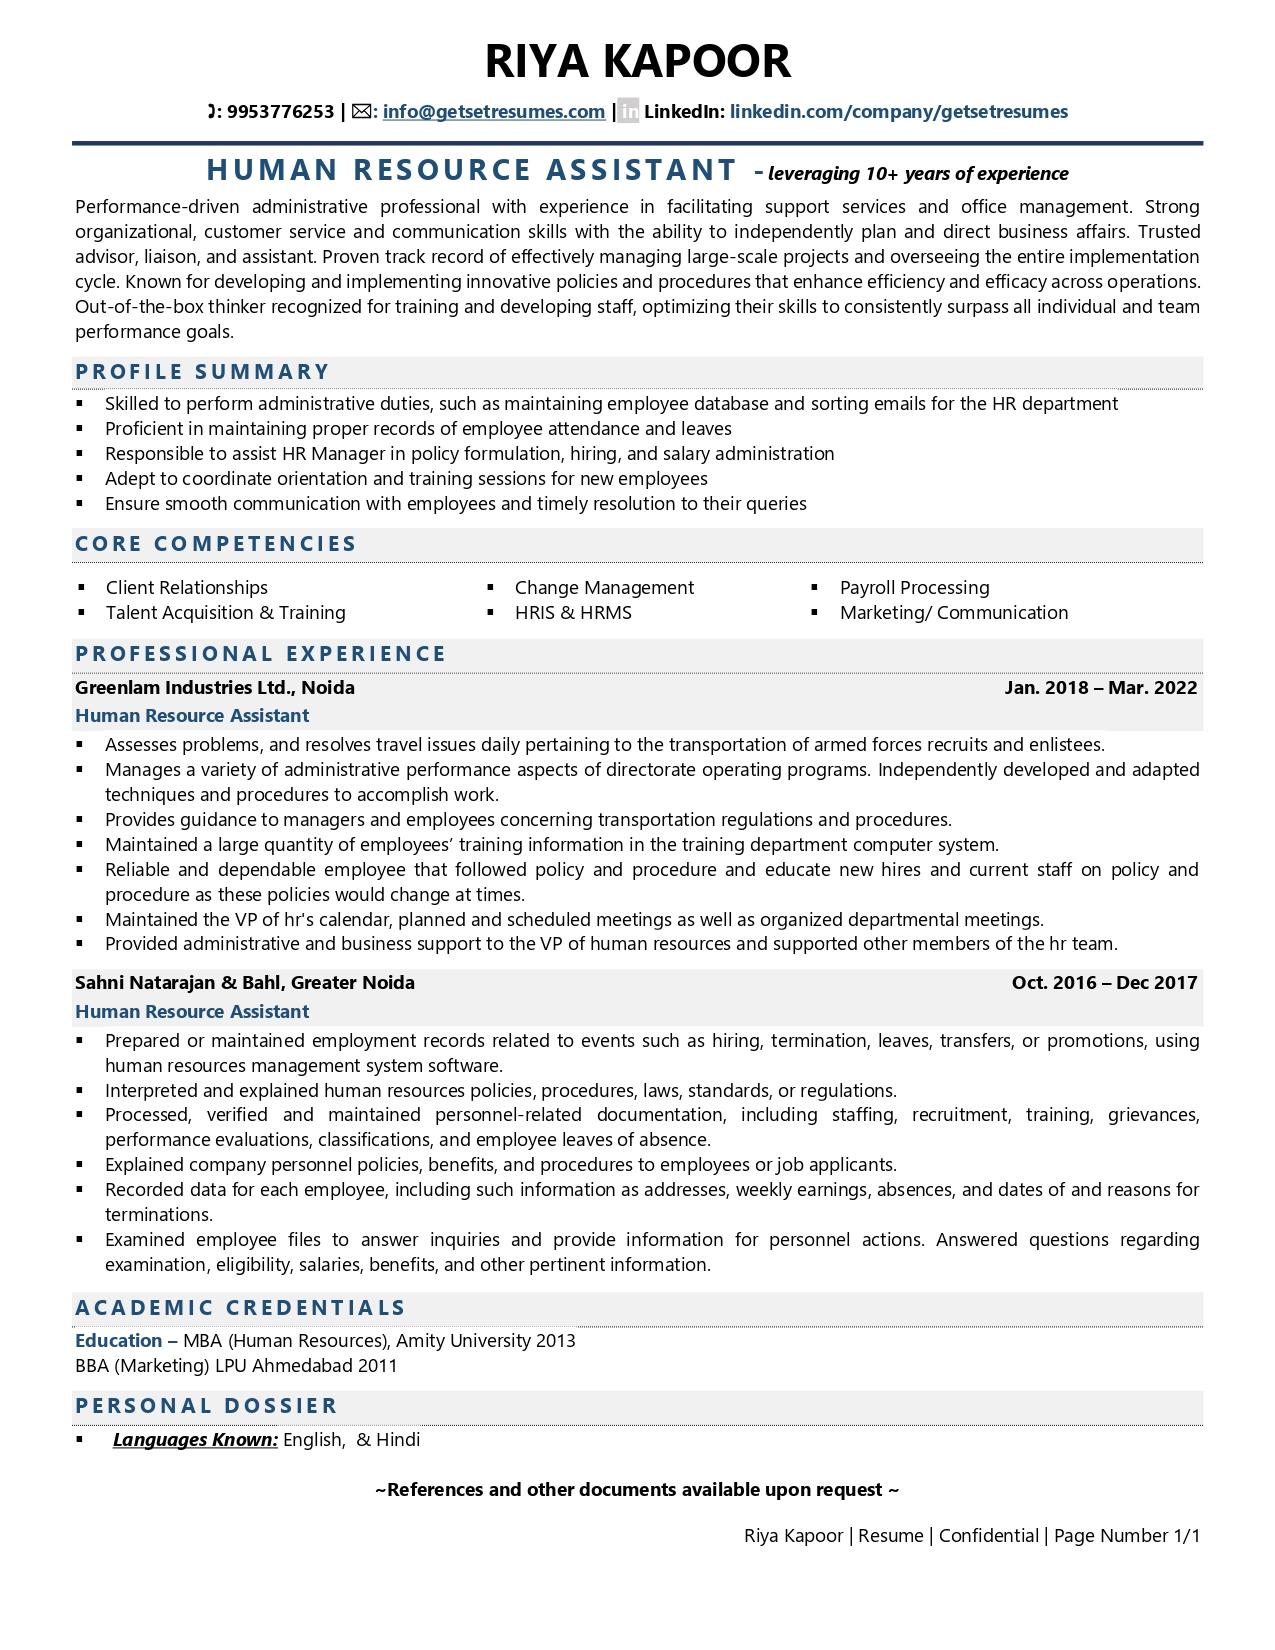 hr assistant duties and responsibilities resume